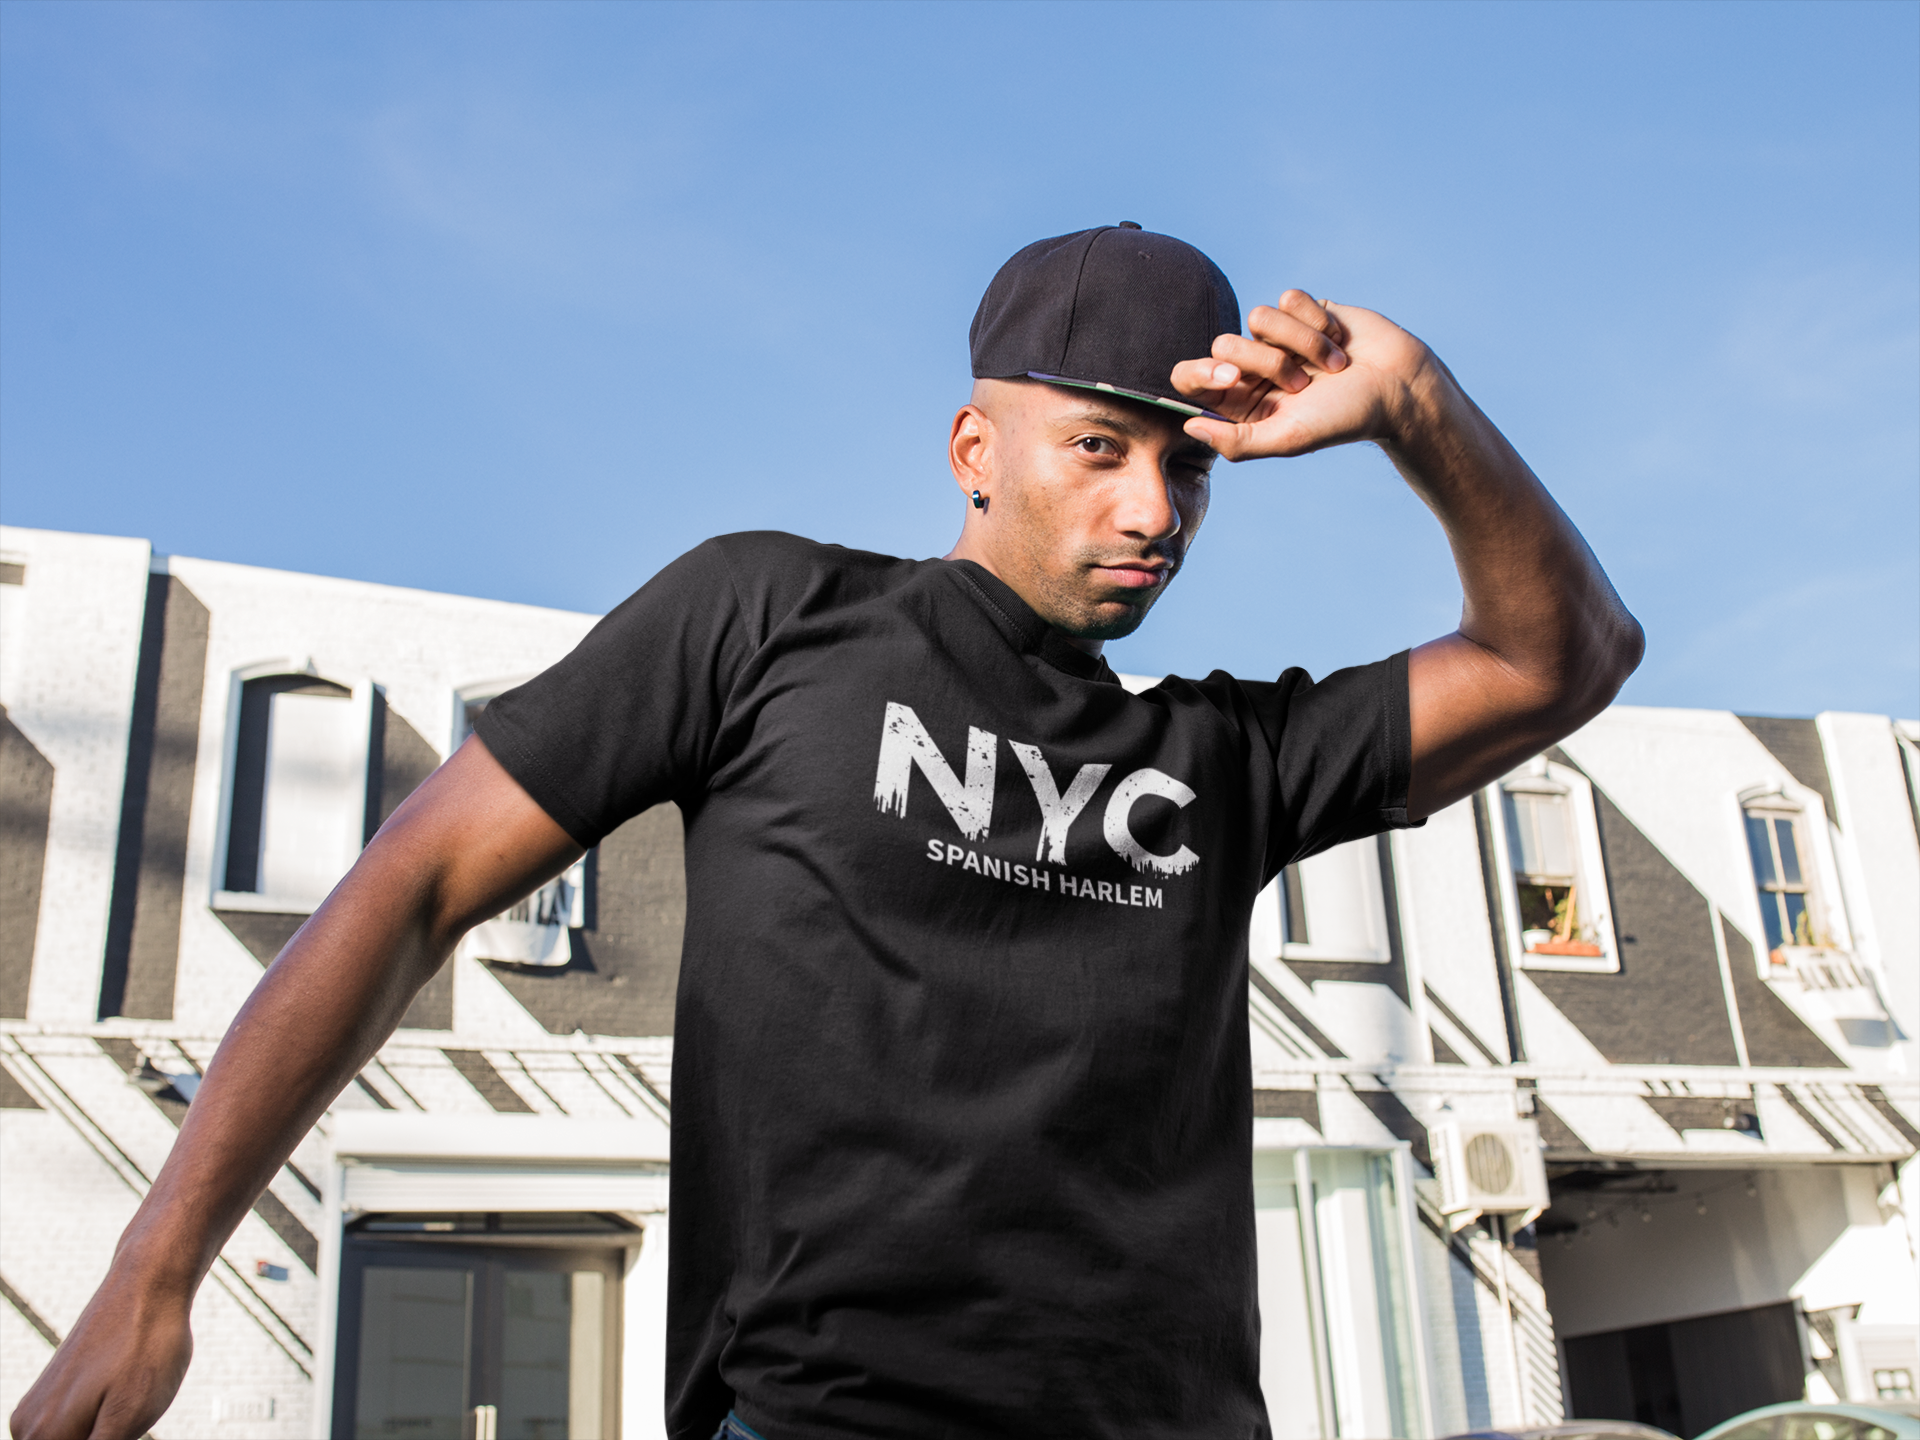 N.Y.C. (Spanish Harlem) Brought to you by (TONY TKA)